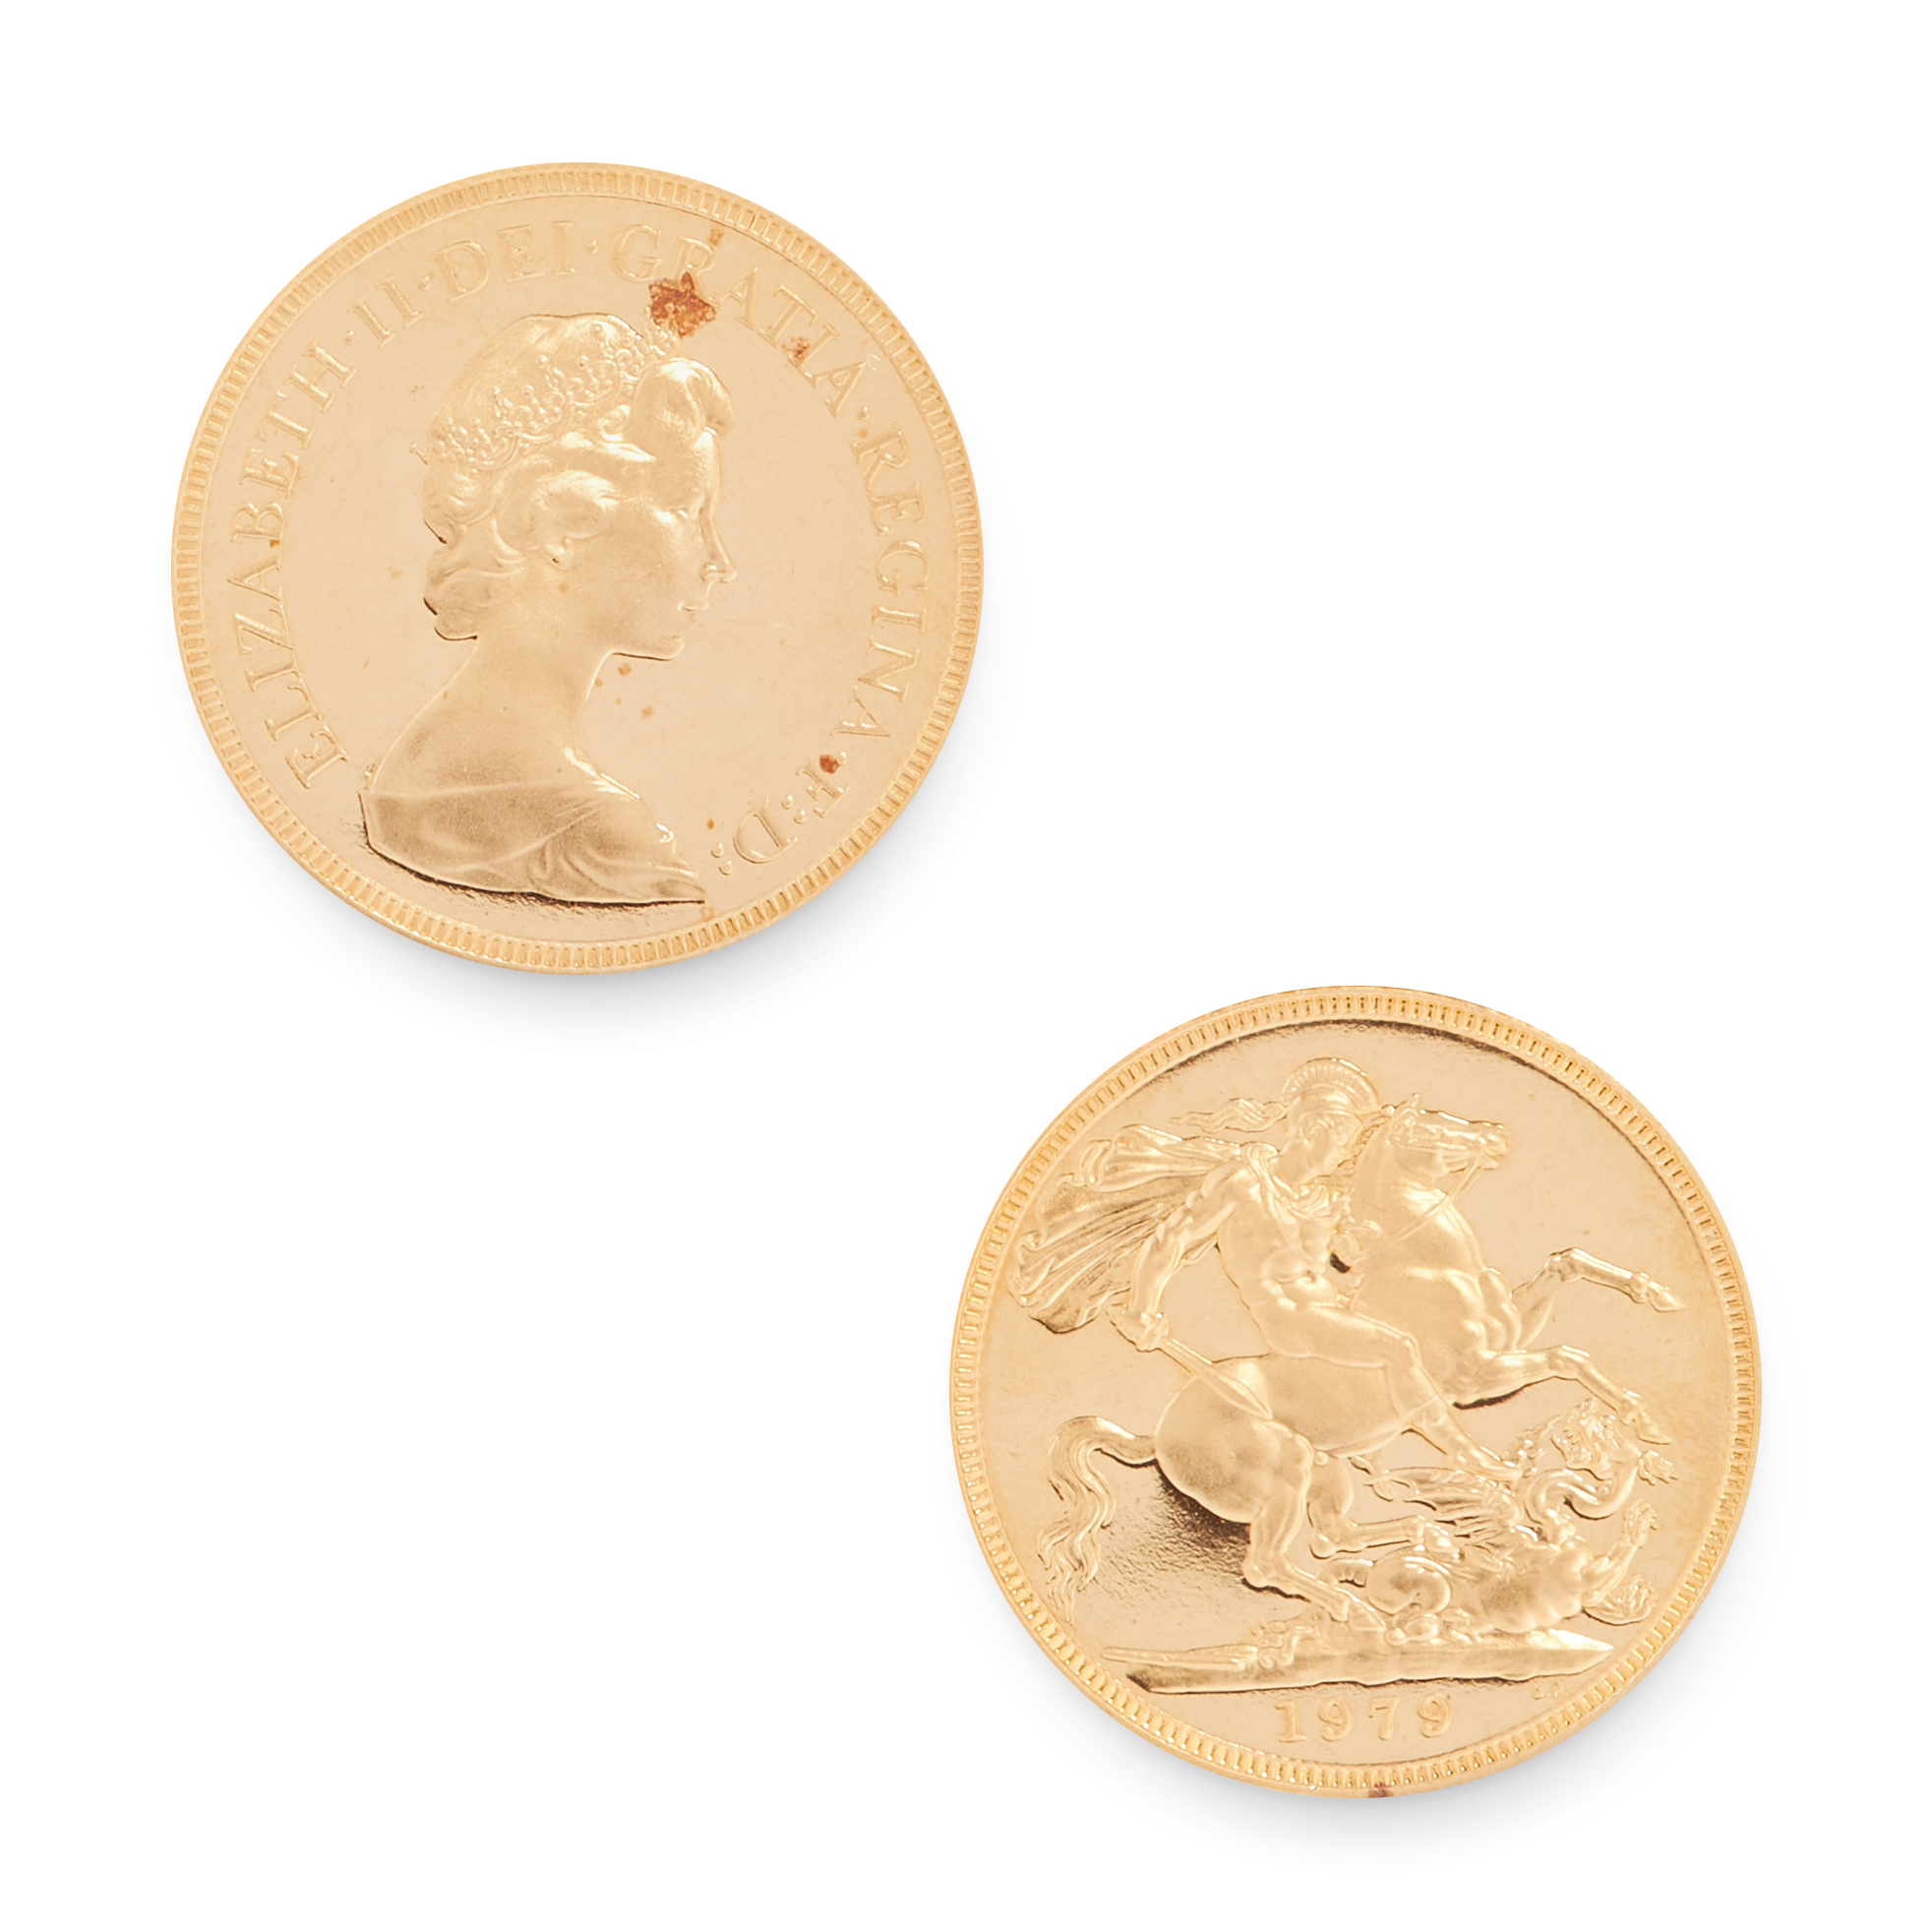 AN ANTIQUE ELIZABETH II FULL SOVEREIGN COIN in 22ct yellow gold, dated 1979, 8.0g.